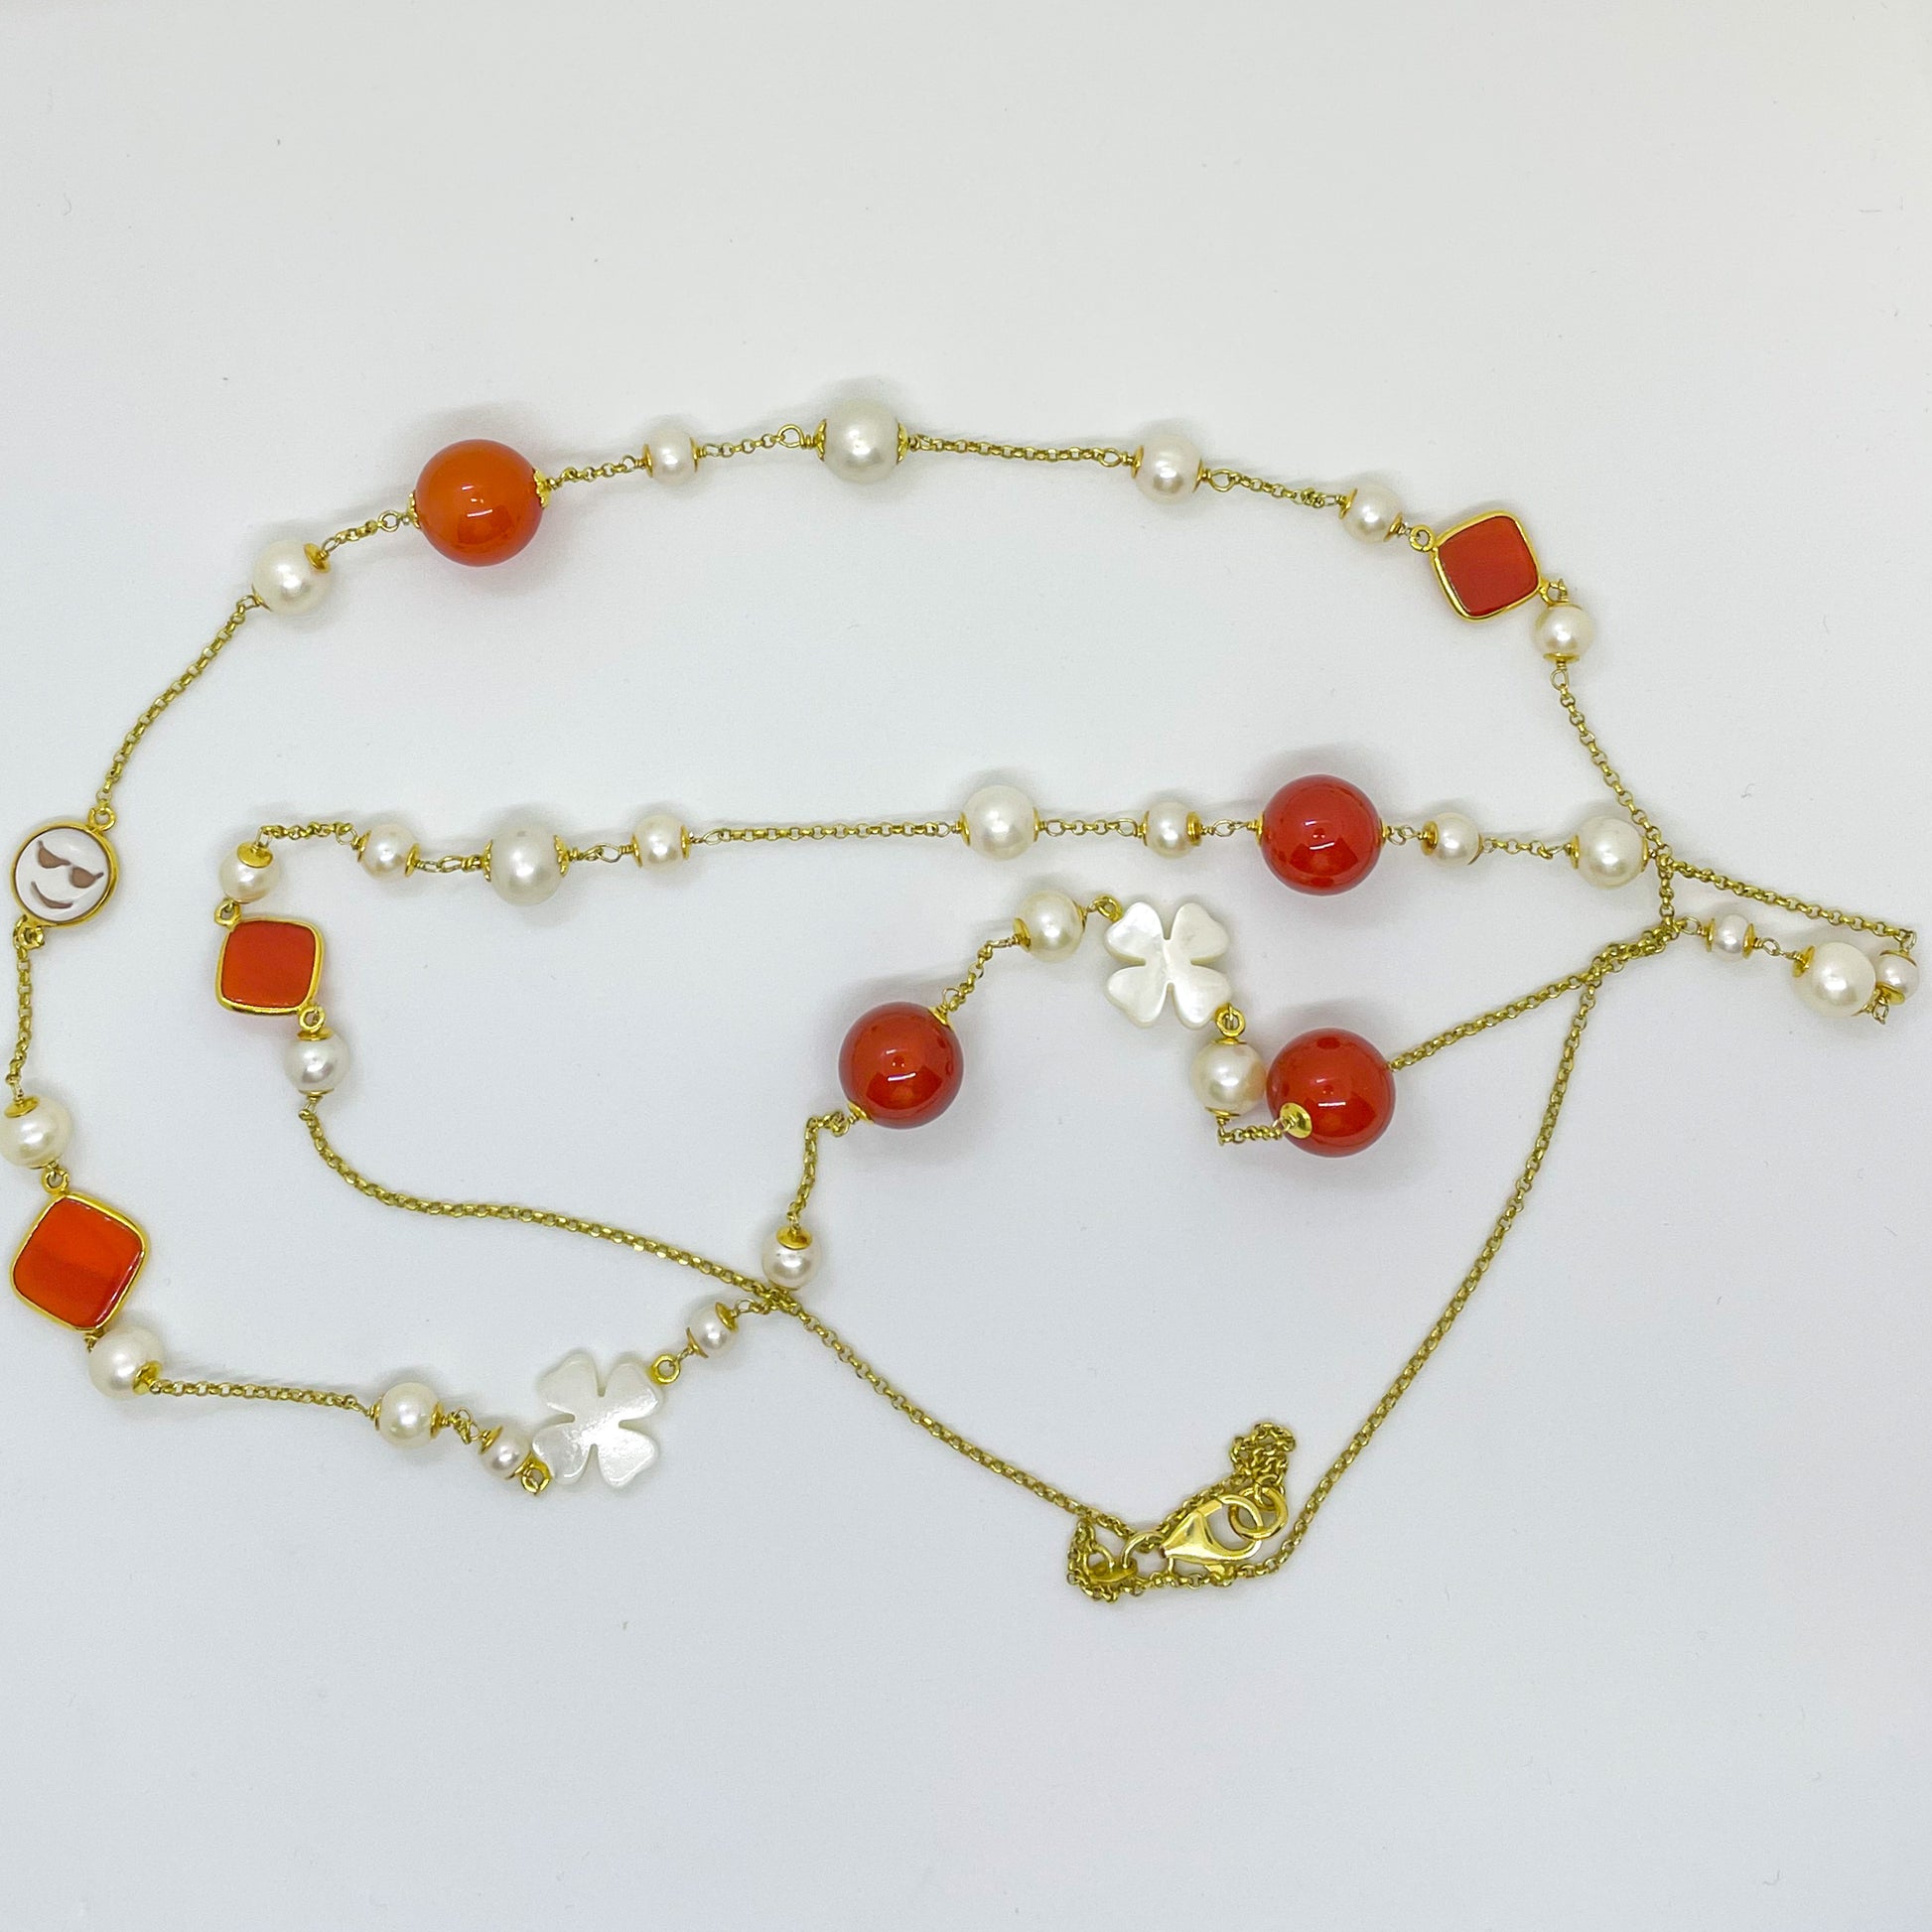 Carnelian, Cameo, Mother of Pearl & Freshwater Pearl Necklace |120cm - John Ross Jewellers